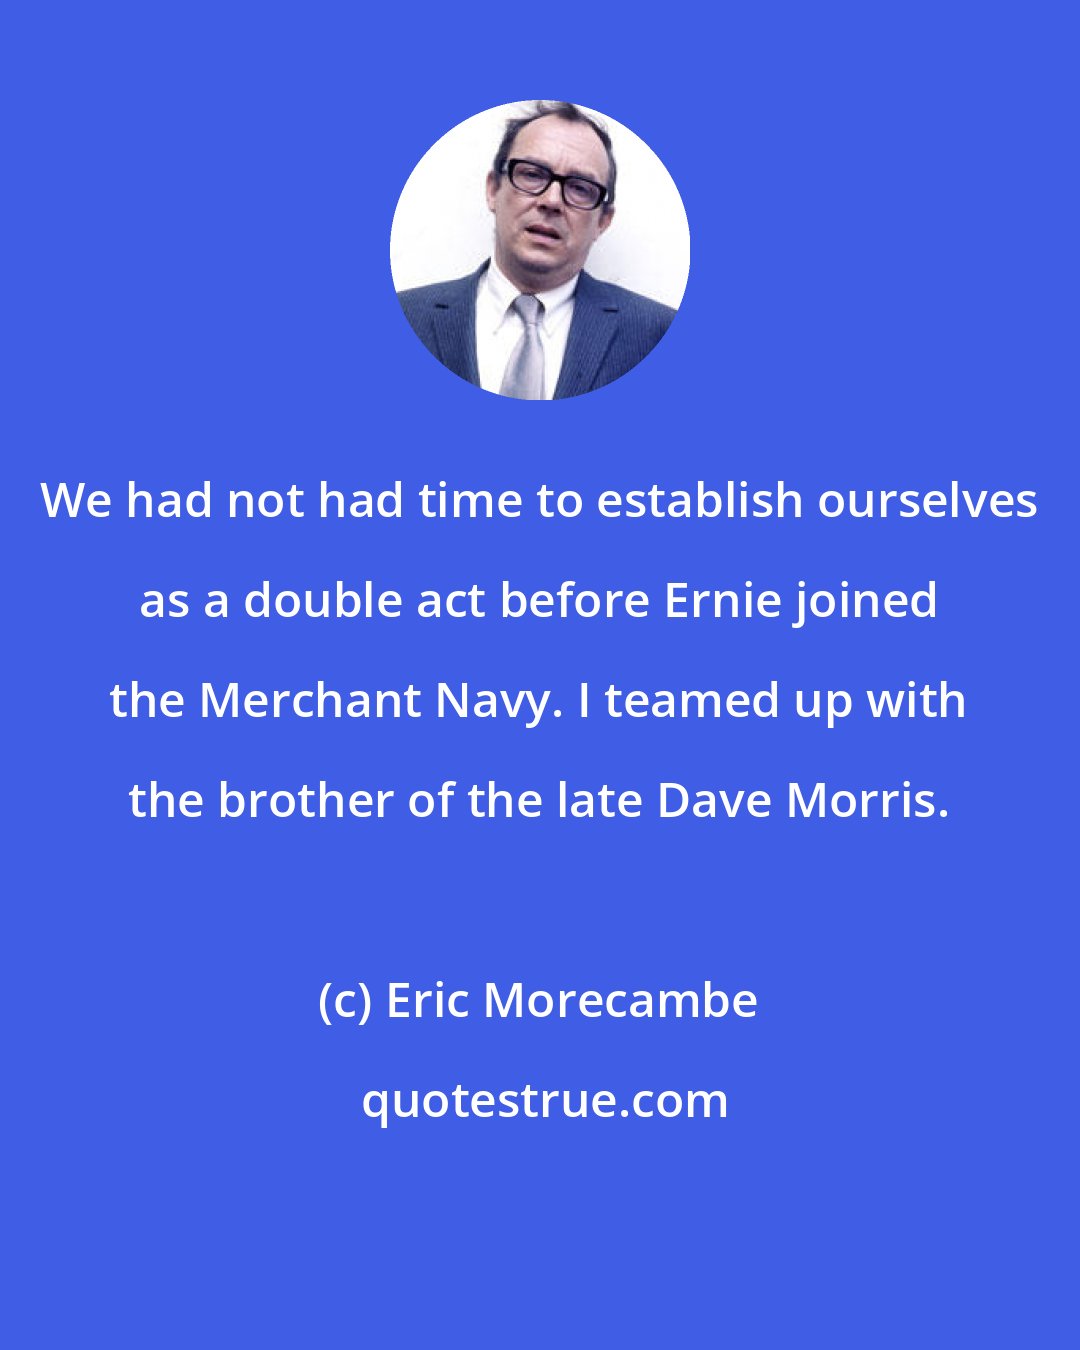 Eric Morecambe: We had not had time to establish ourselves as a double act before Ernie joined the Merchant Navy. I teamed up with the brother of the late Dave Morris.